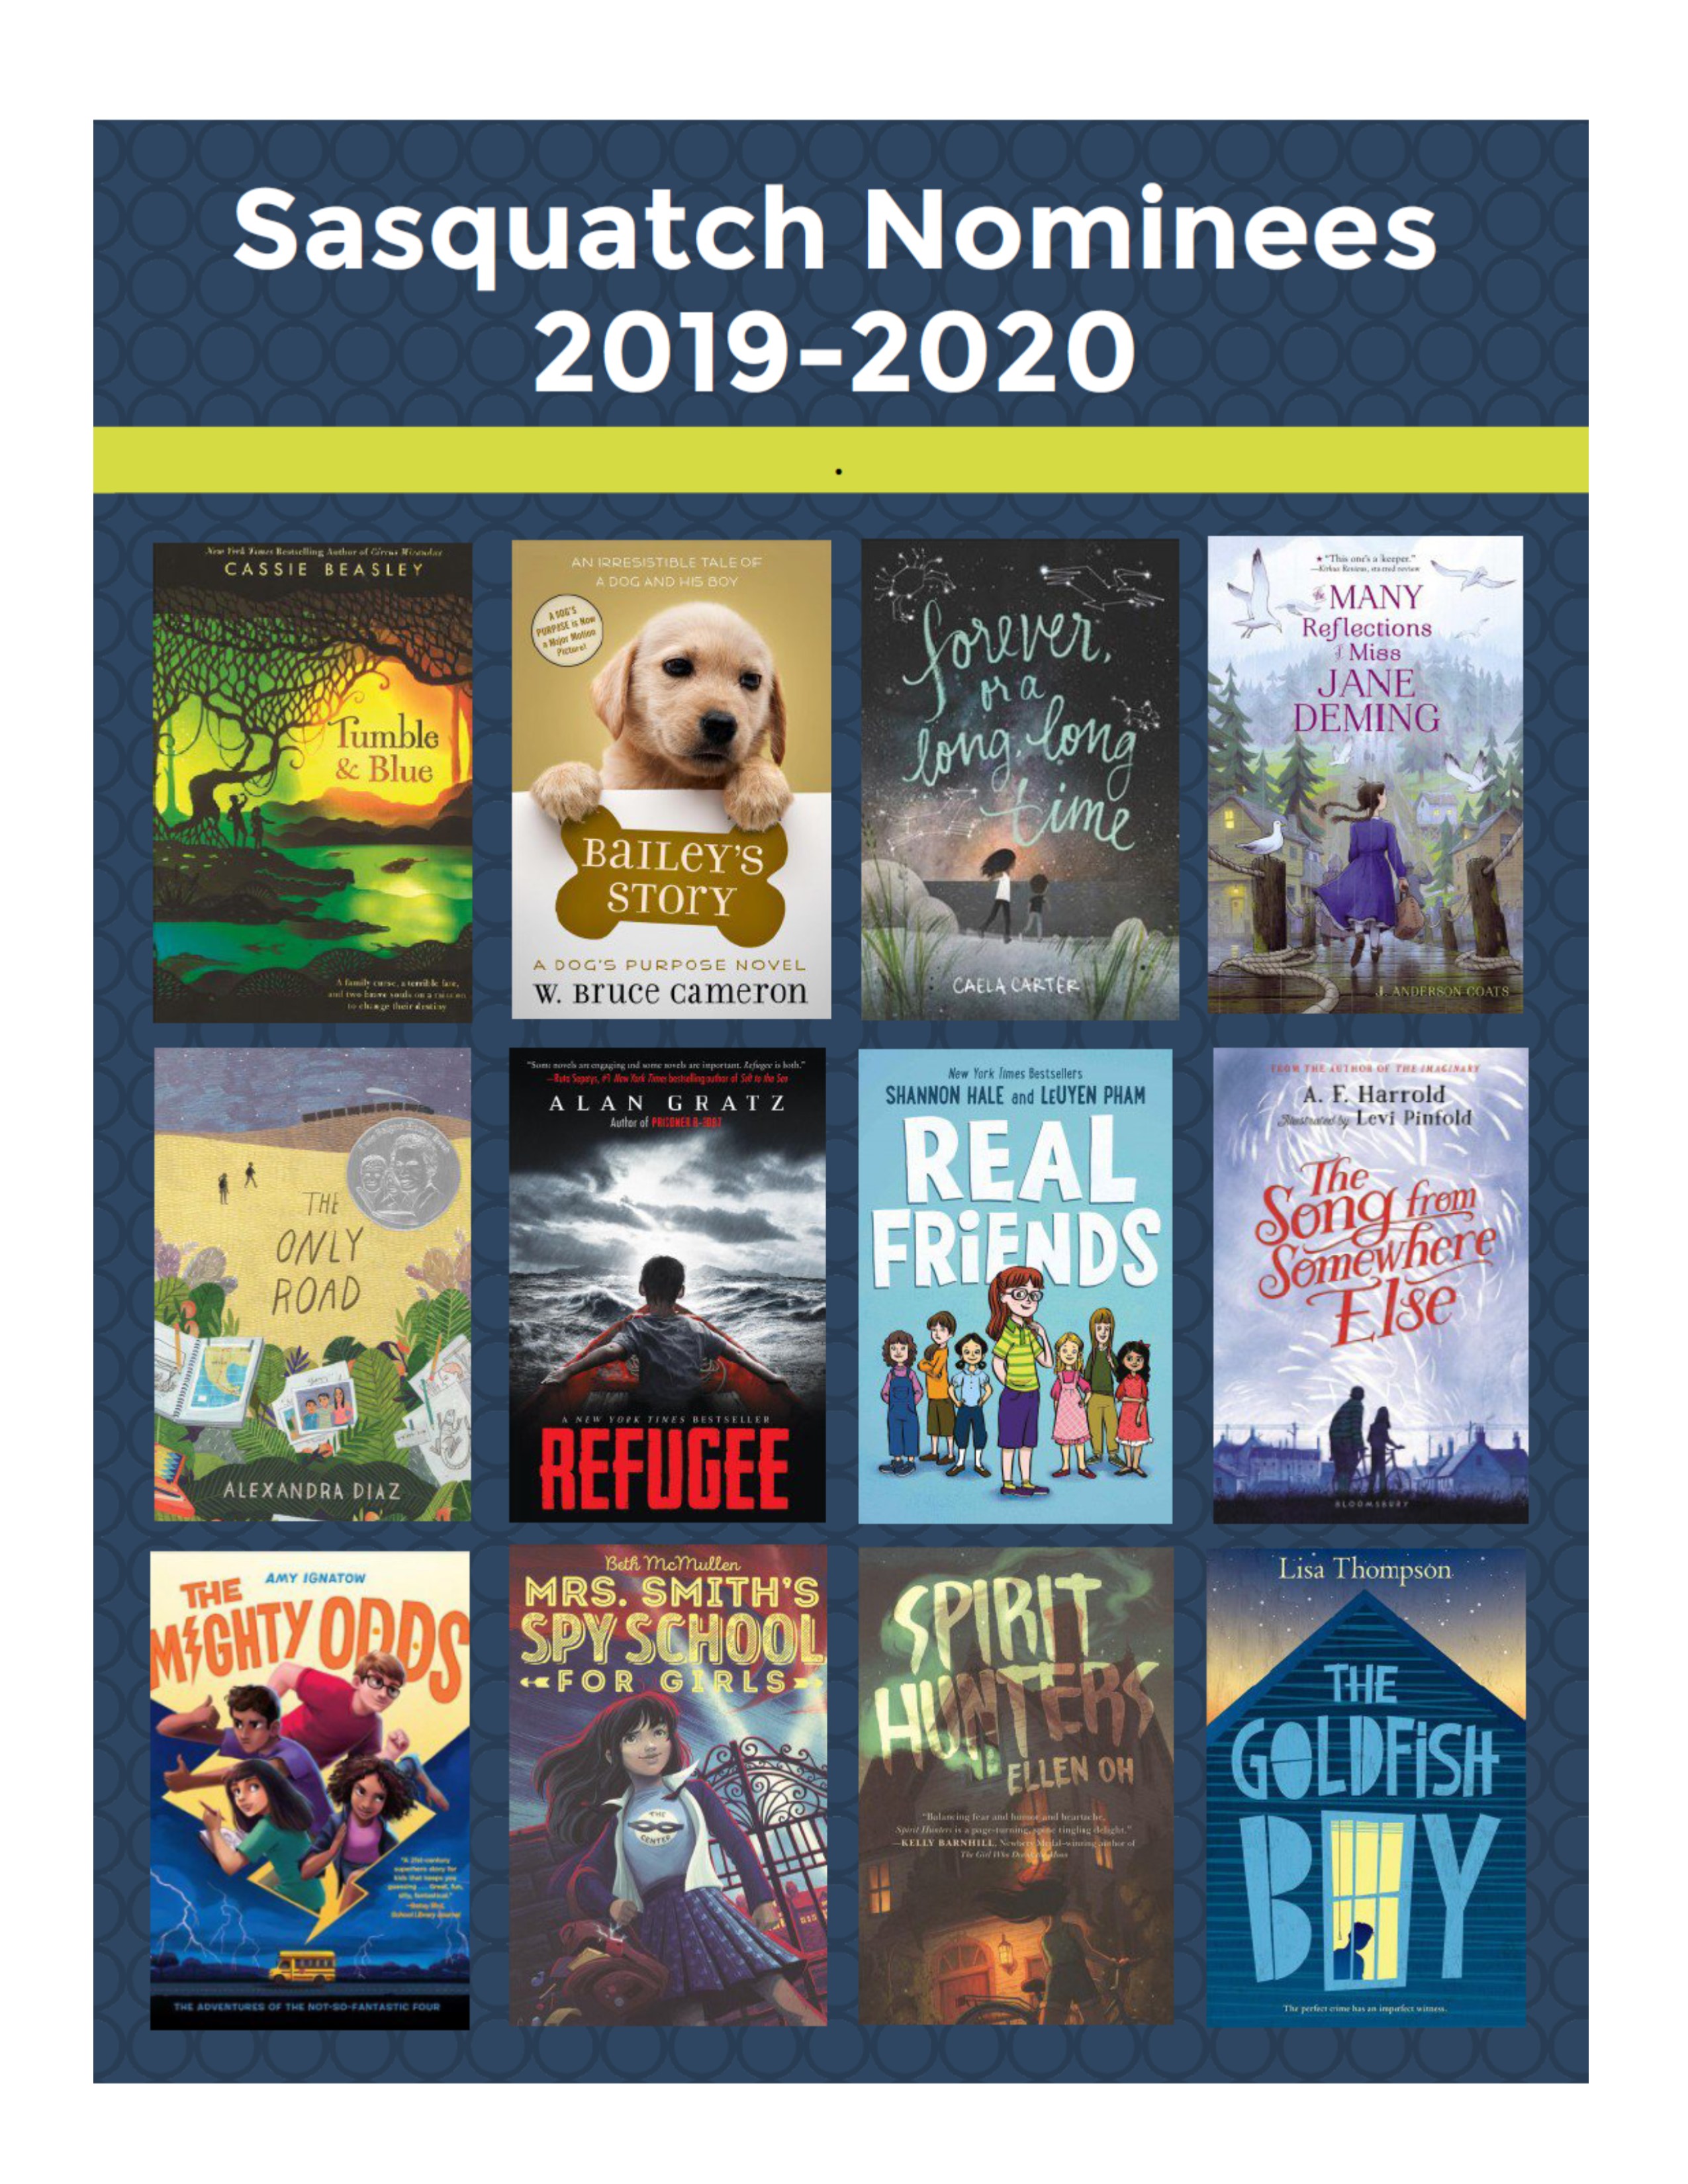 Sasquatch 2020 books are listed below image